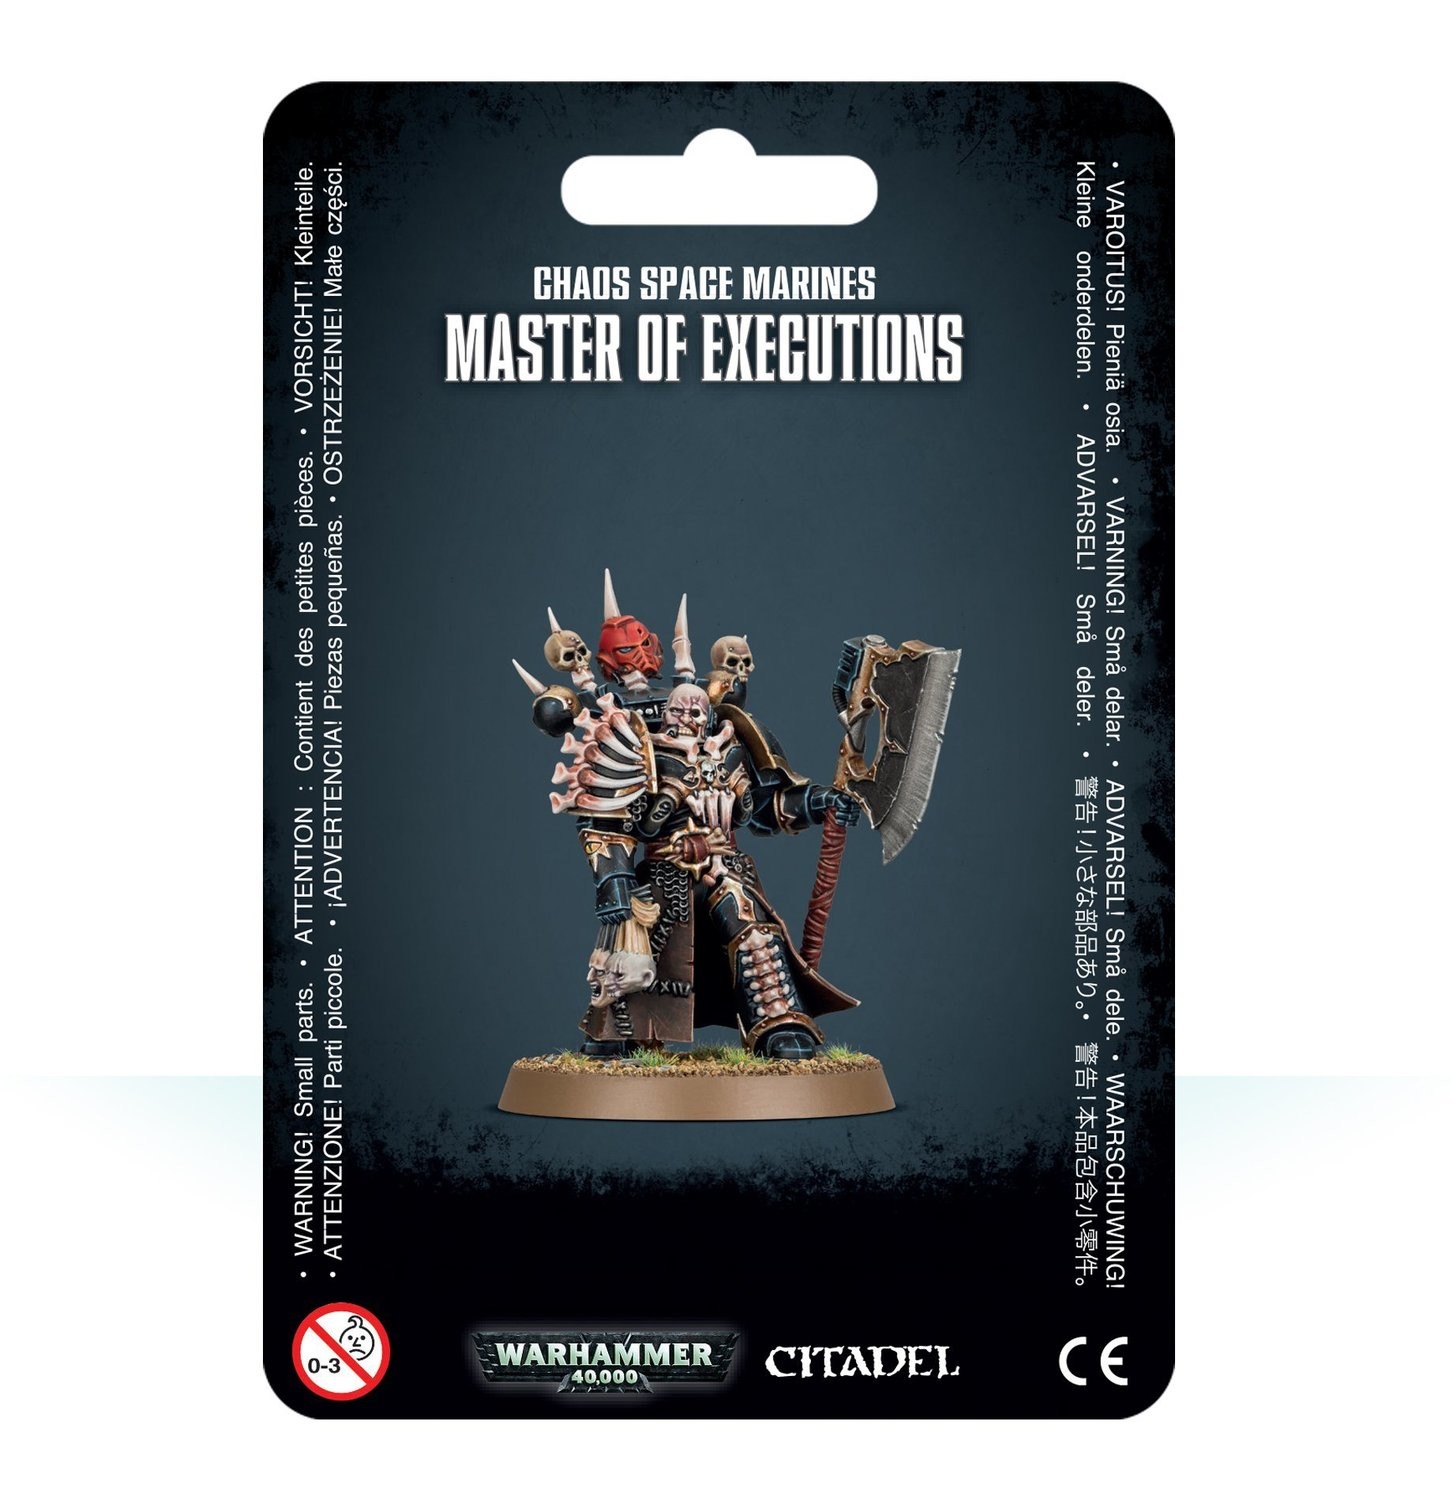 Chaos Space Marines Master of Executions - Warhammer 40.000 - Games Workshop